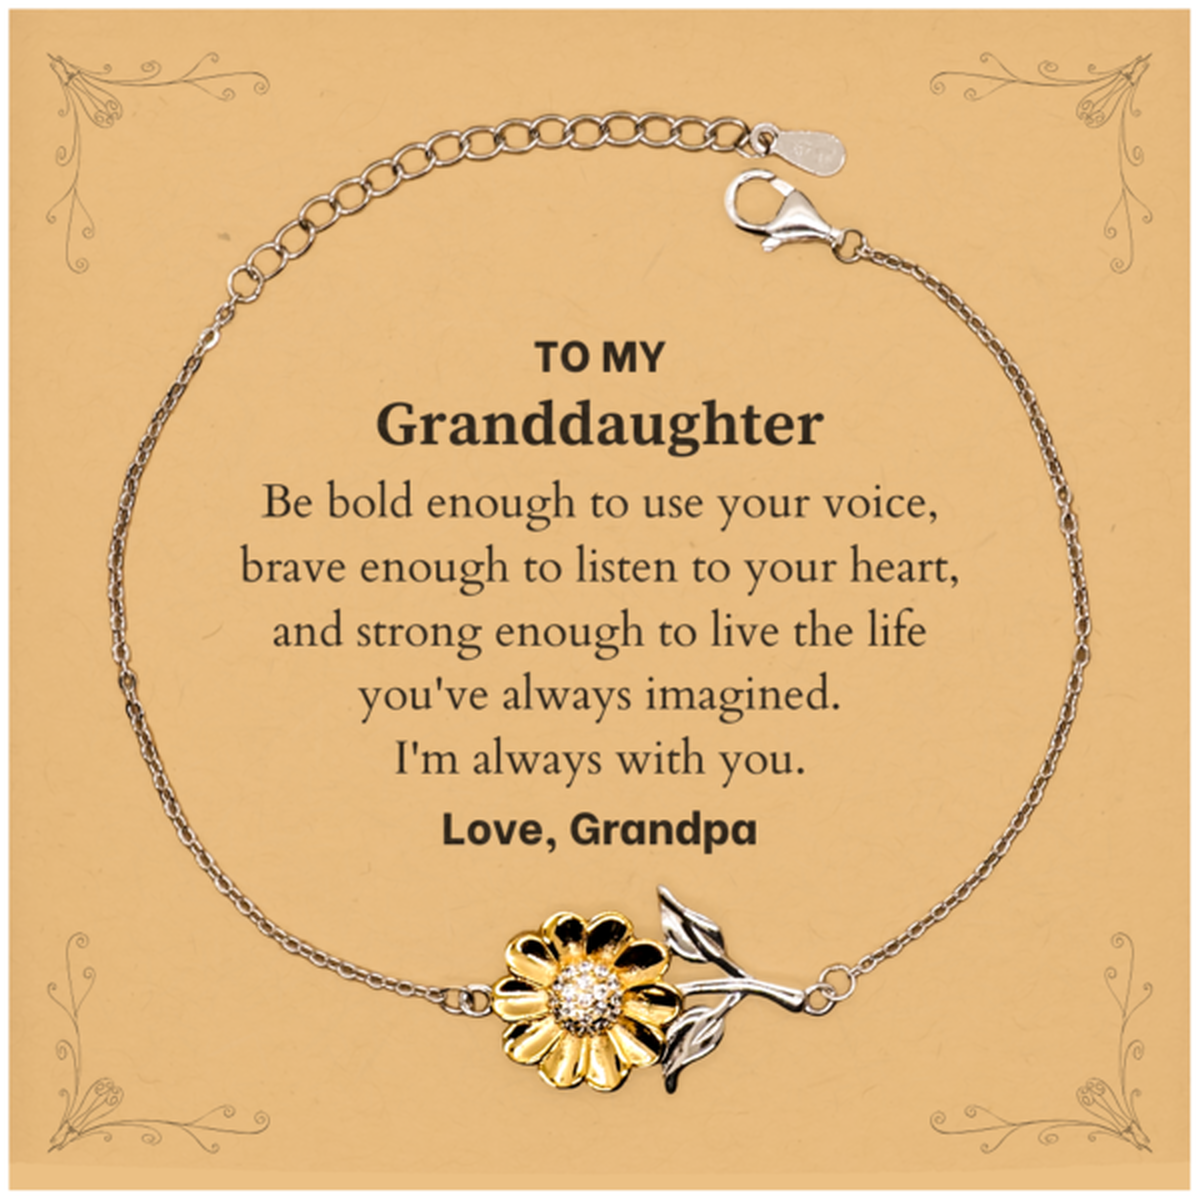 Keepsake Granddaughter Sunflower Bracelet Gift Idea Graduation Christmas Birthday Granddaughter from Grandpa, Granddaughter Be bold enough to use your voice, brave enough to listen to your heart. Love, Grandpa